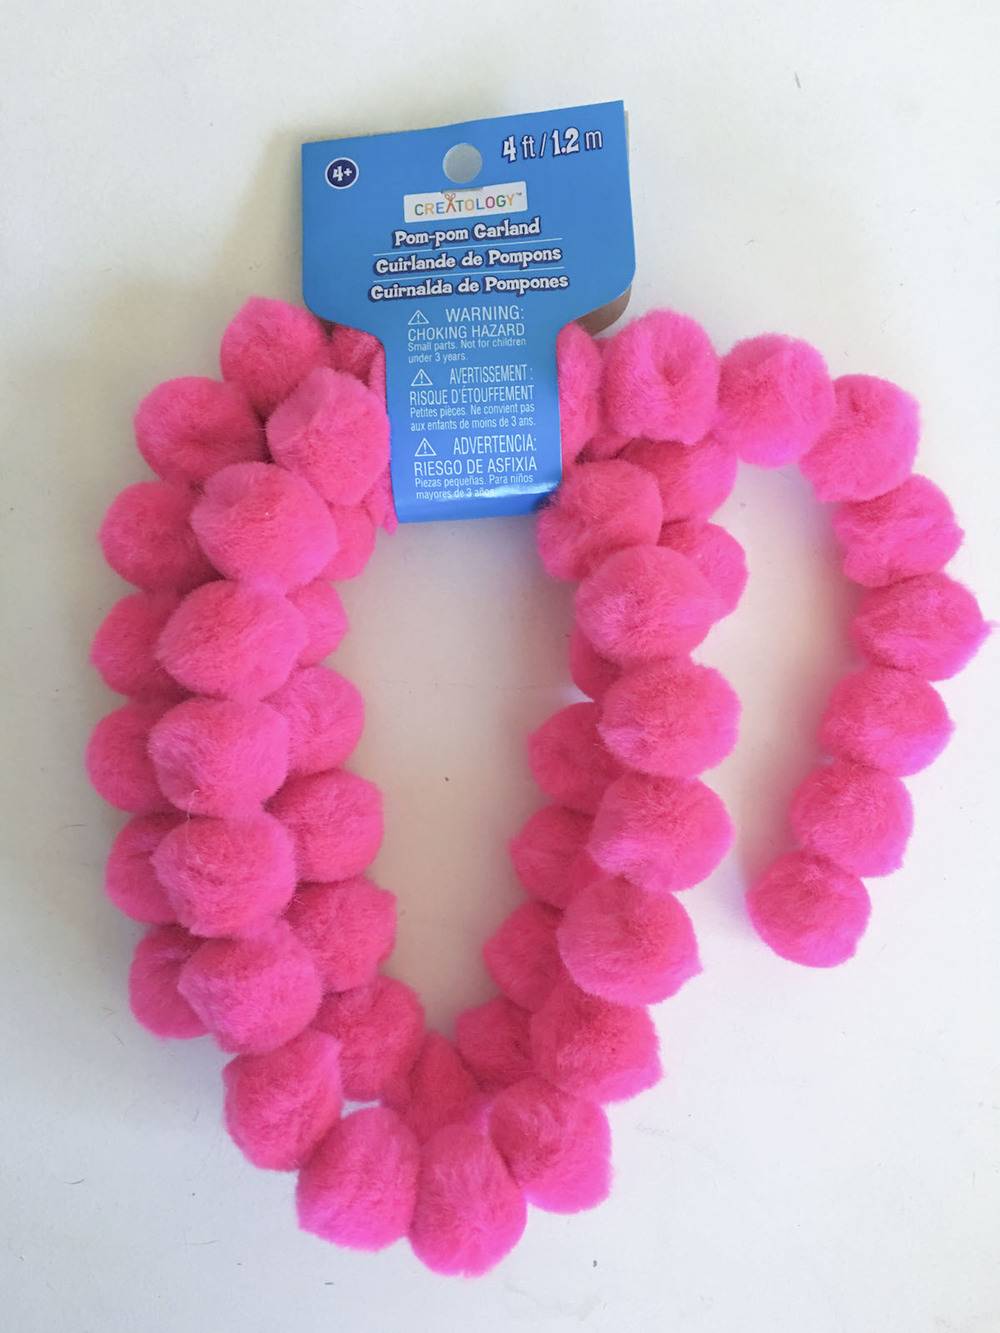 A line of pink puffs rolled up and clasped by a blue tag.